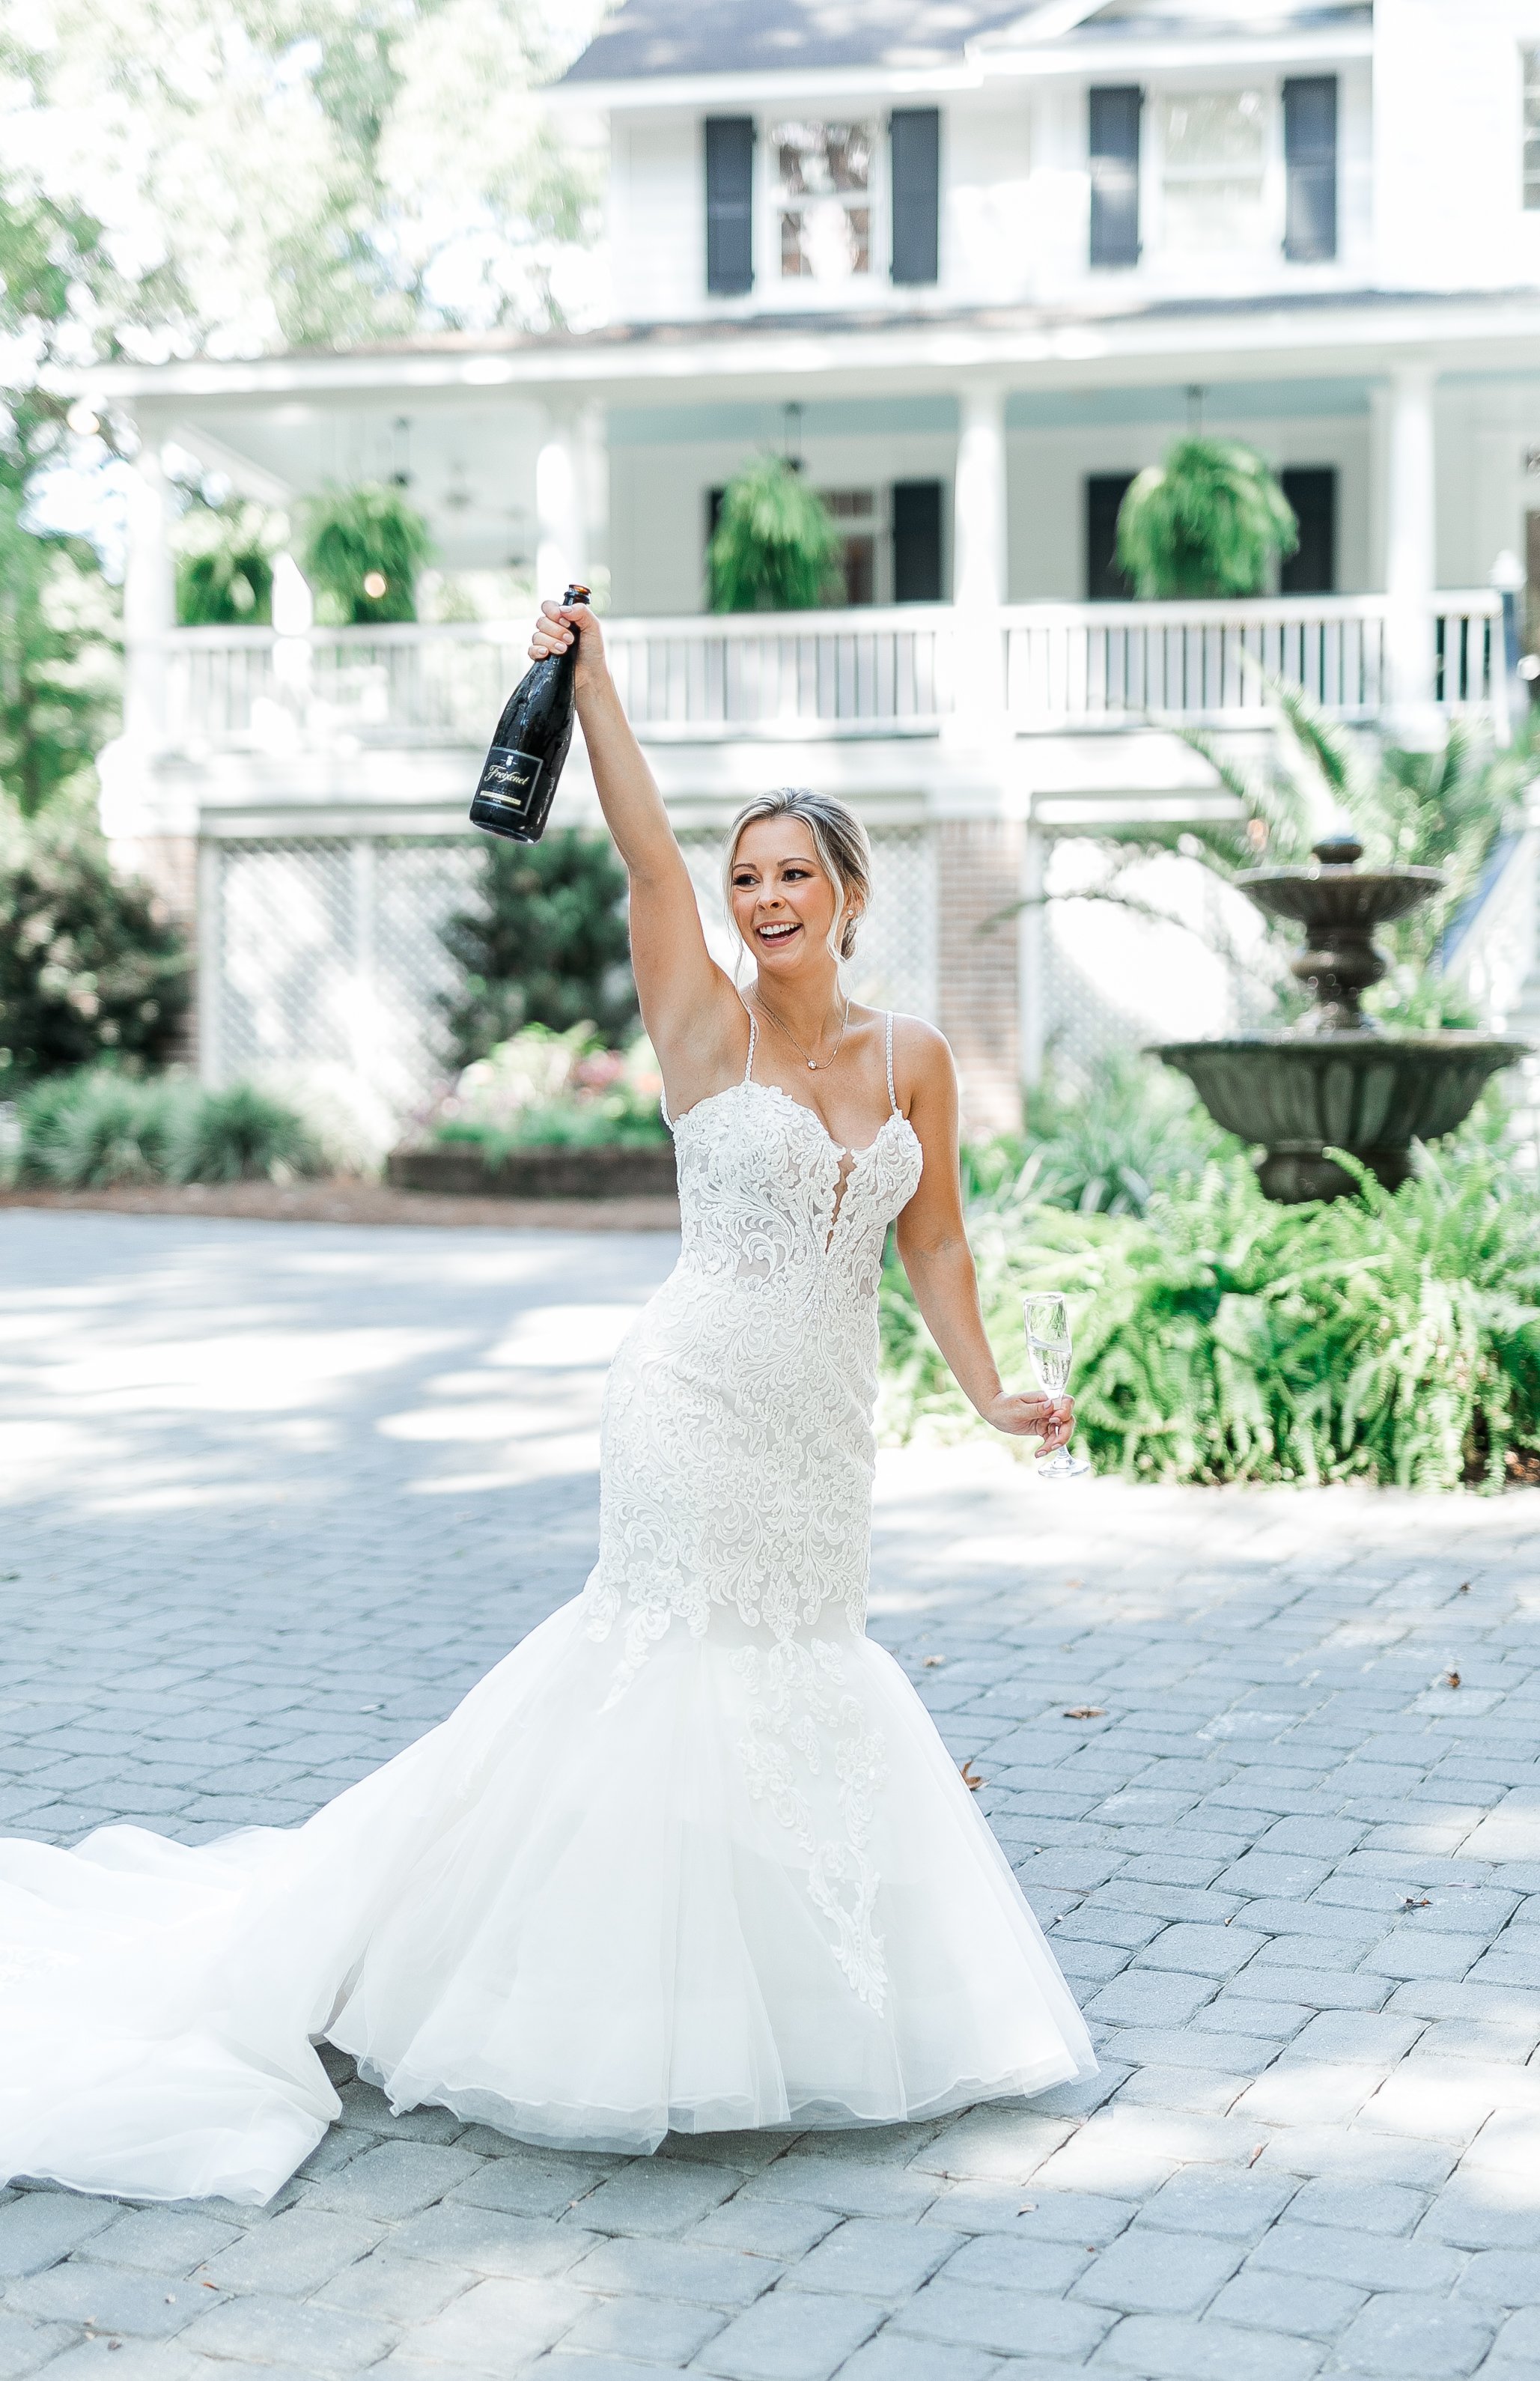 ivory-and-beau-bride-and-florals-wedding-blog-real-bride-real-wedding-savannah-wedding-southern-wedding-mackey-house-alistaire-maggie-sottero-wedding-dress-organic-natural-neutral-wedding-flowers-wedding-florist-savannah-Evan+MerrittWeddingDay_-22.jpg